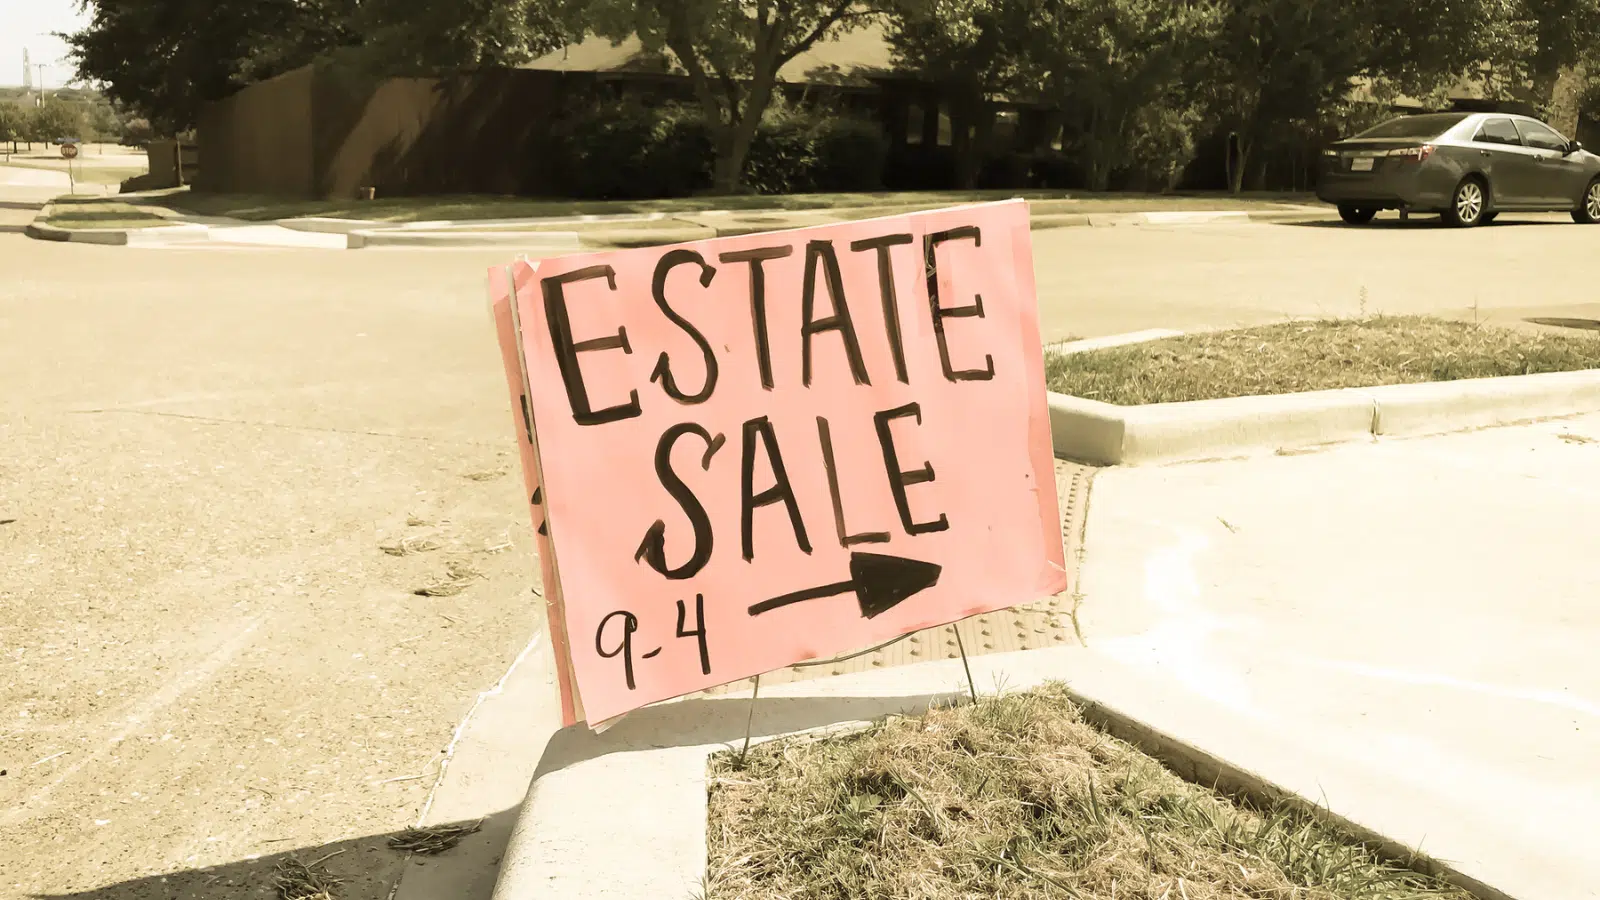 10 Tips For Shopping Estate Sales